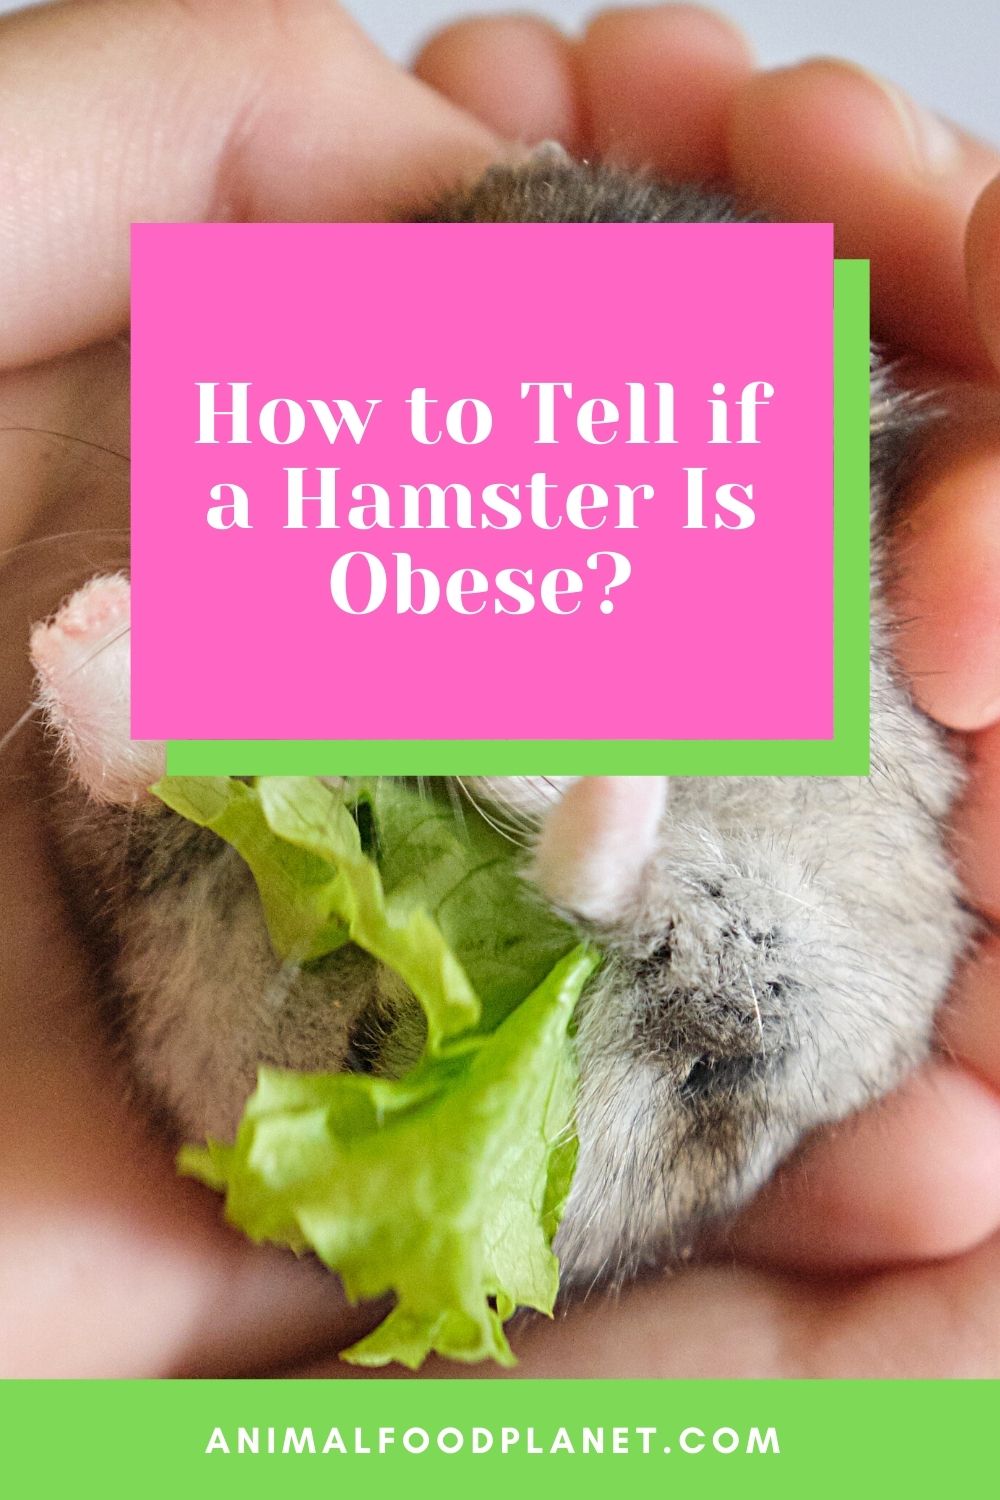 How To Tell If A Hamster Is Obese?